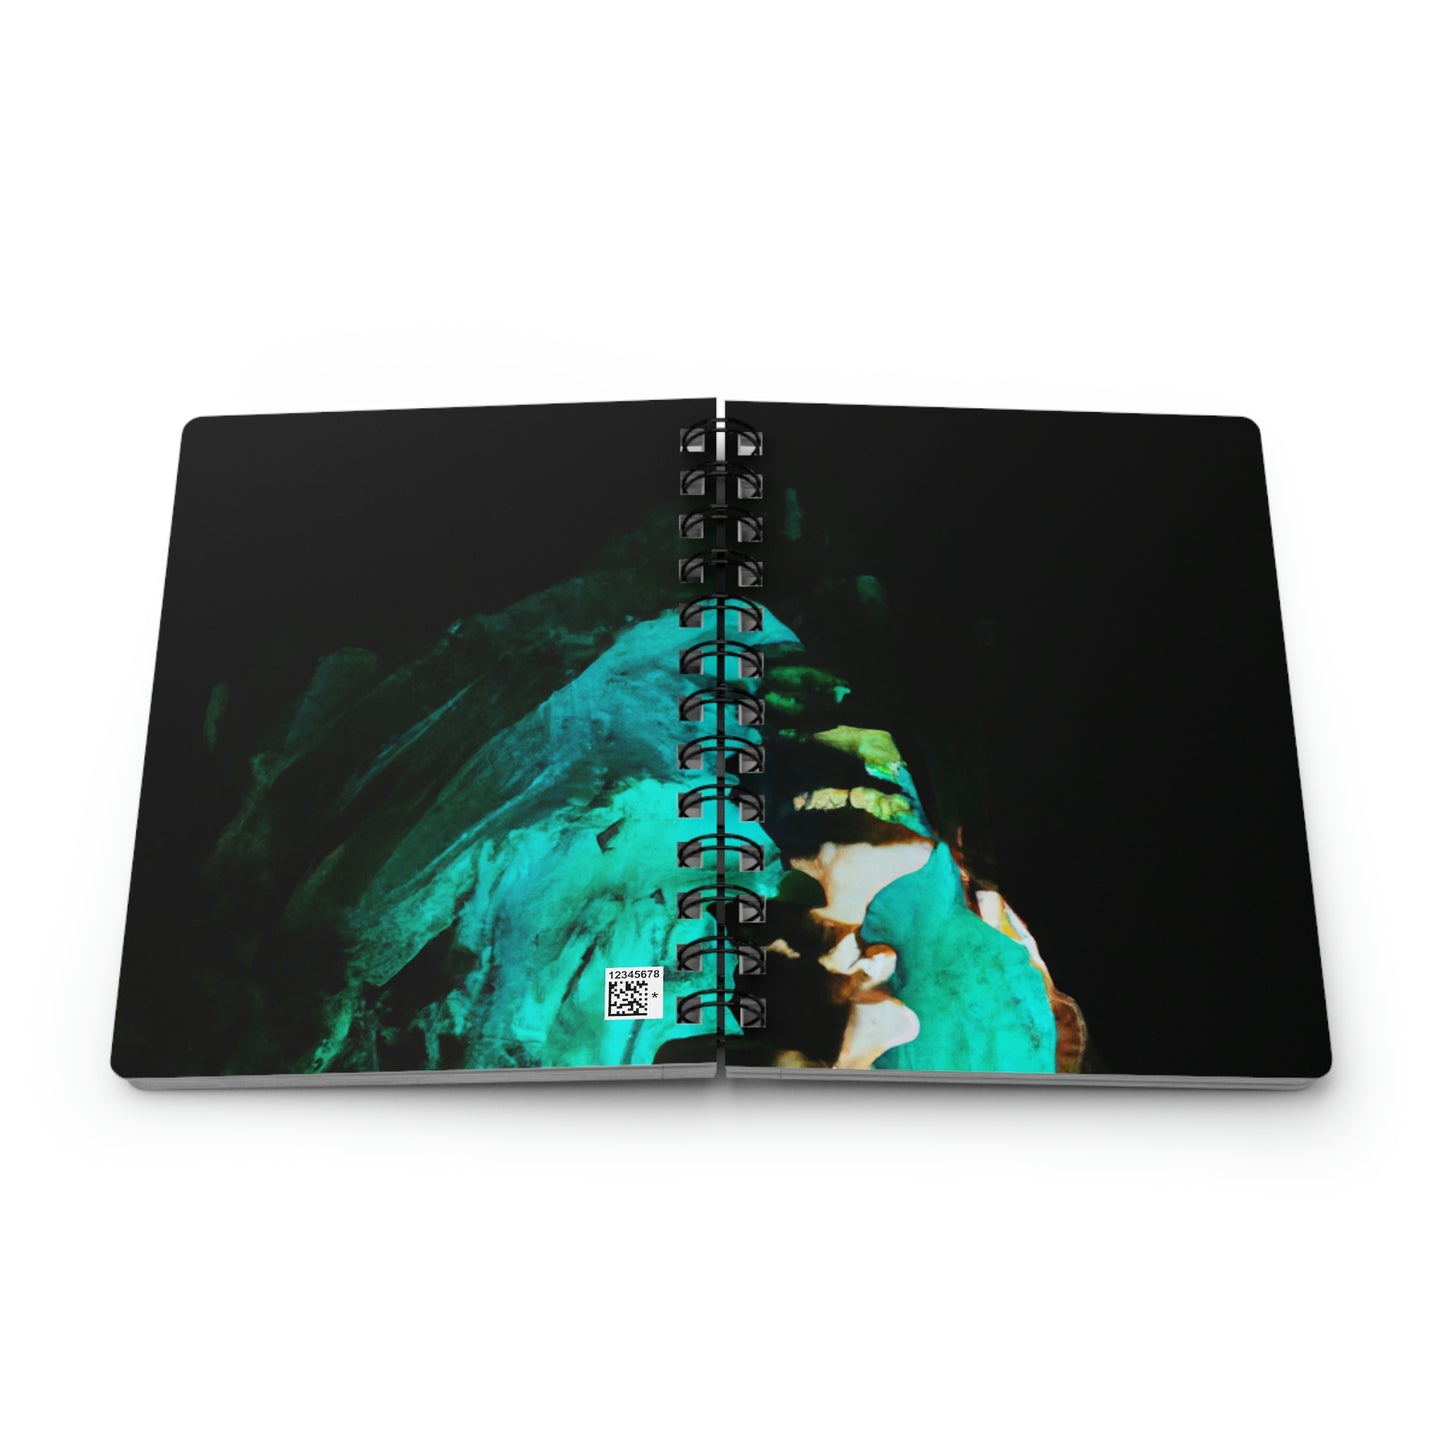 The Gleaming Relic of the Cave - The Alien Spiral Bound Journal